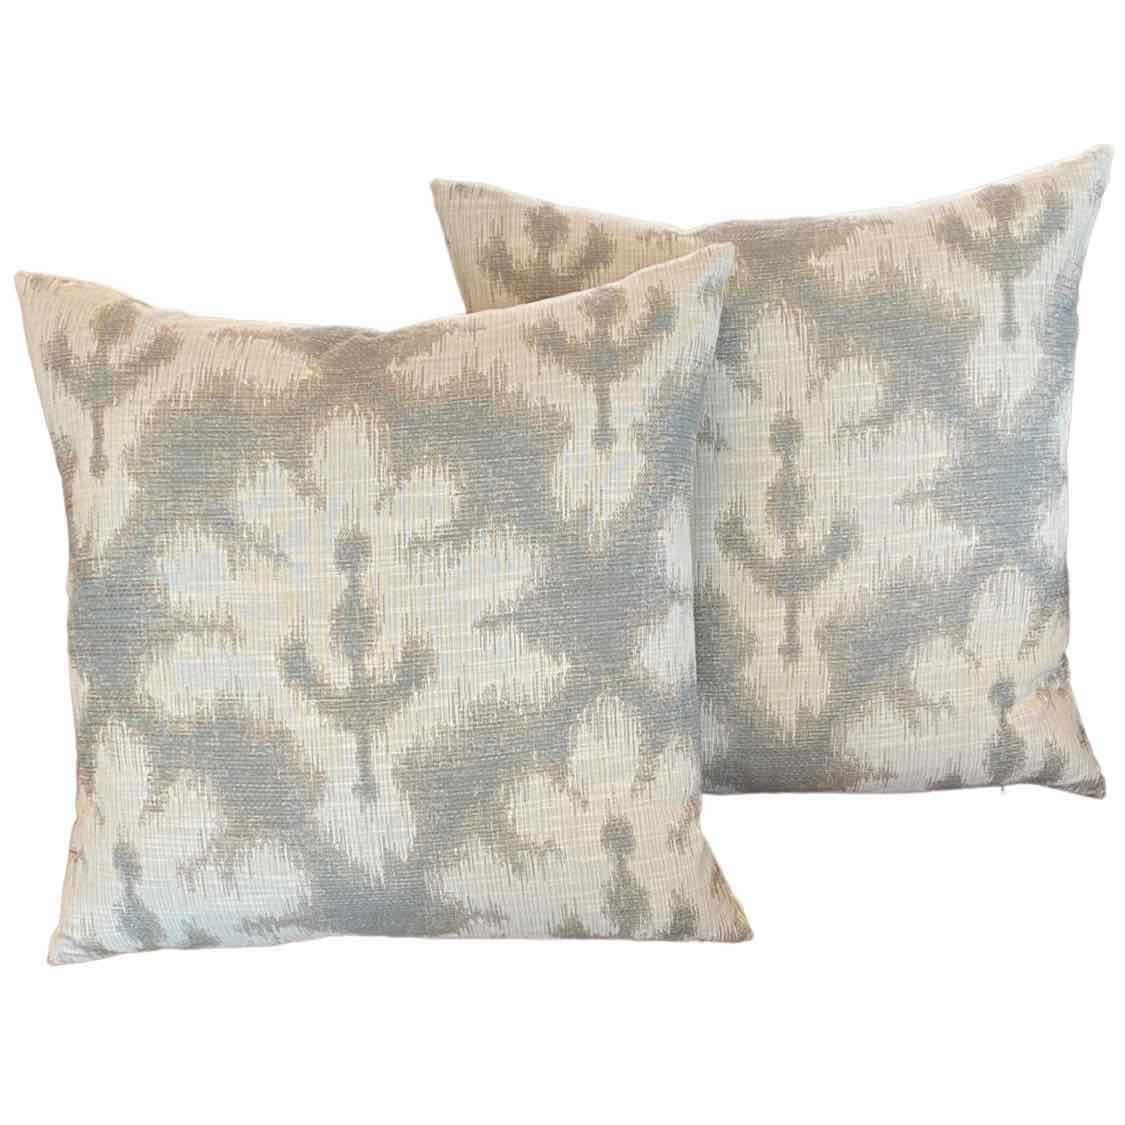 Pair of Custom Grey & White Ikat Pillows - colletteconsignment.com